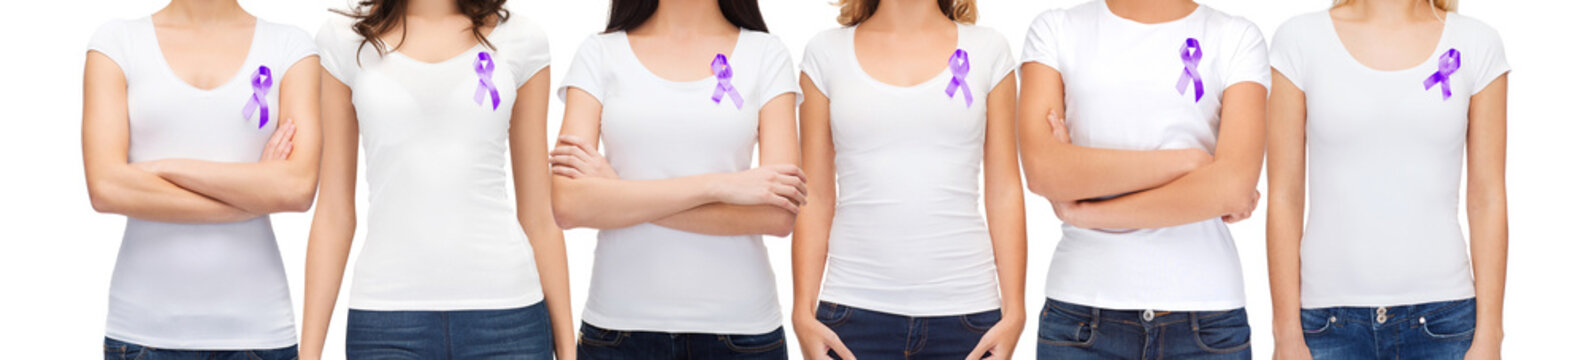 close up of women with purple awareness ribbon